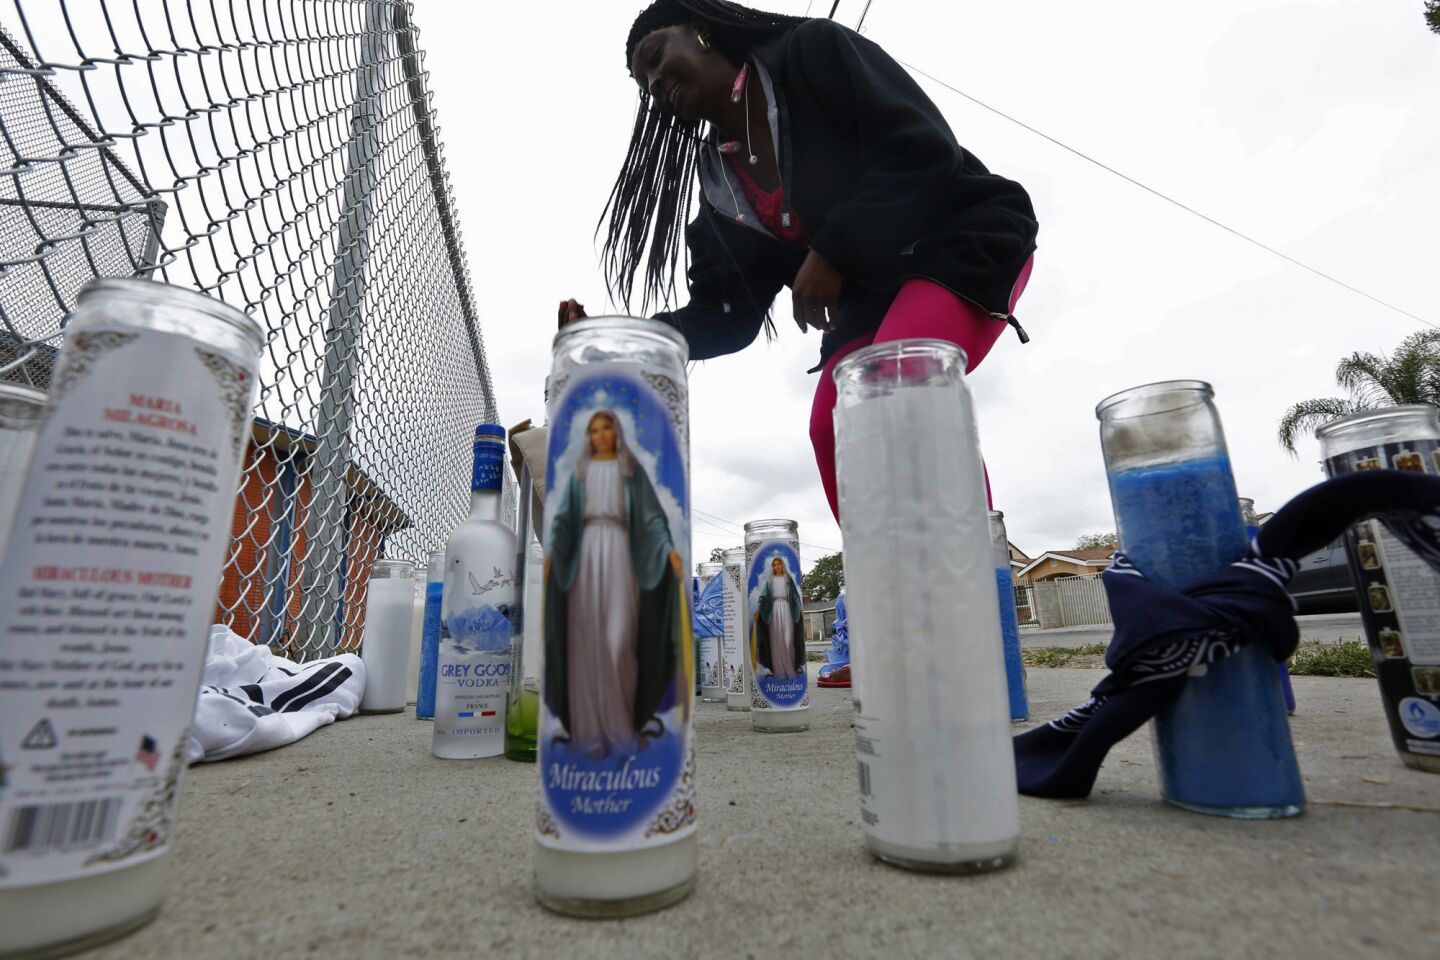 Tracie Bryant visits a memorial for shooting victim Anthony Alexander next to Robert F. Kennedy Elementary School on West Caldwell Street in Compton. "He lay right there," said Bryant, as she pointed to a dark spot in the middle of the road.